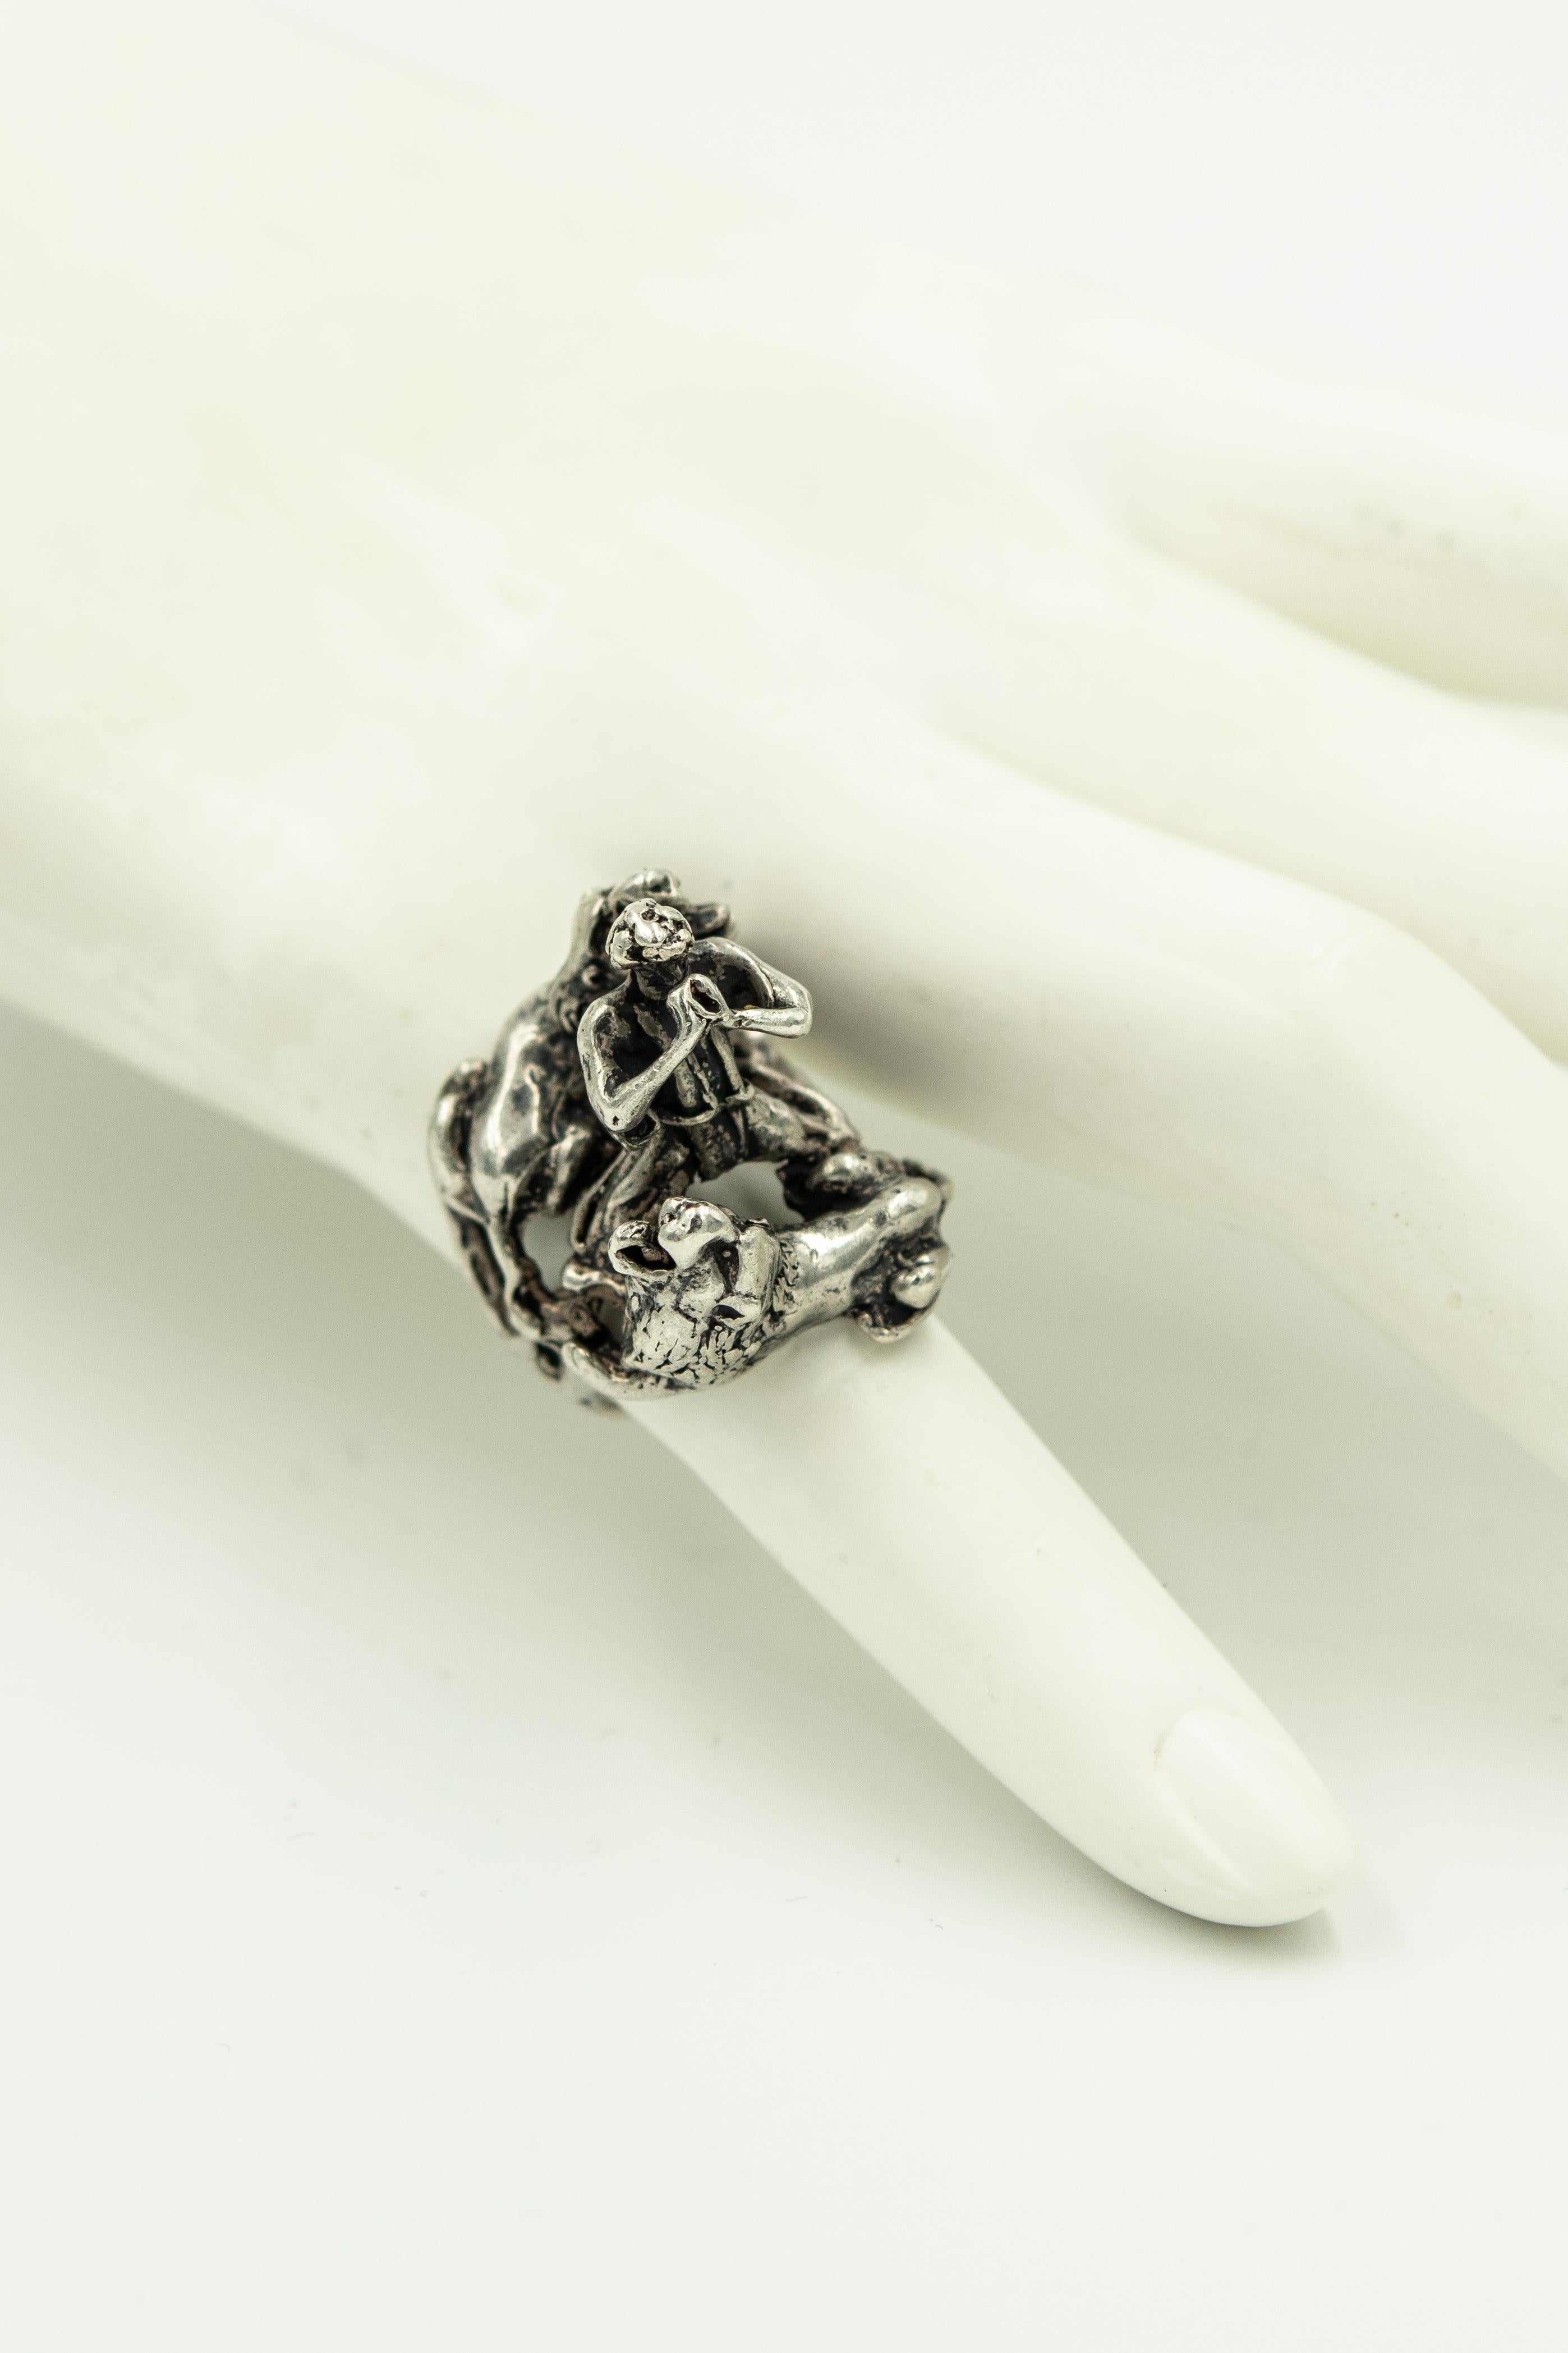 Handmade Three Dimensional Judah and the Lions Sterling Silver Judaica Ring 1